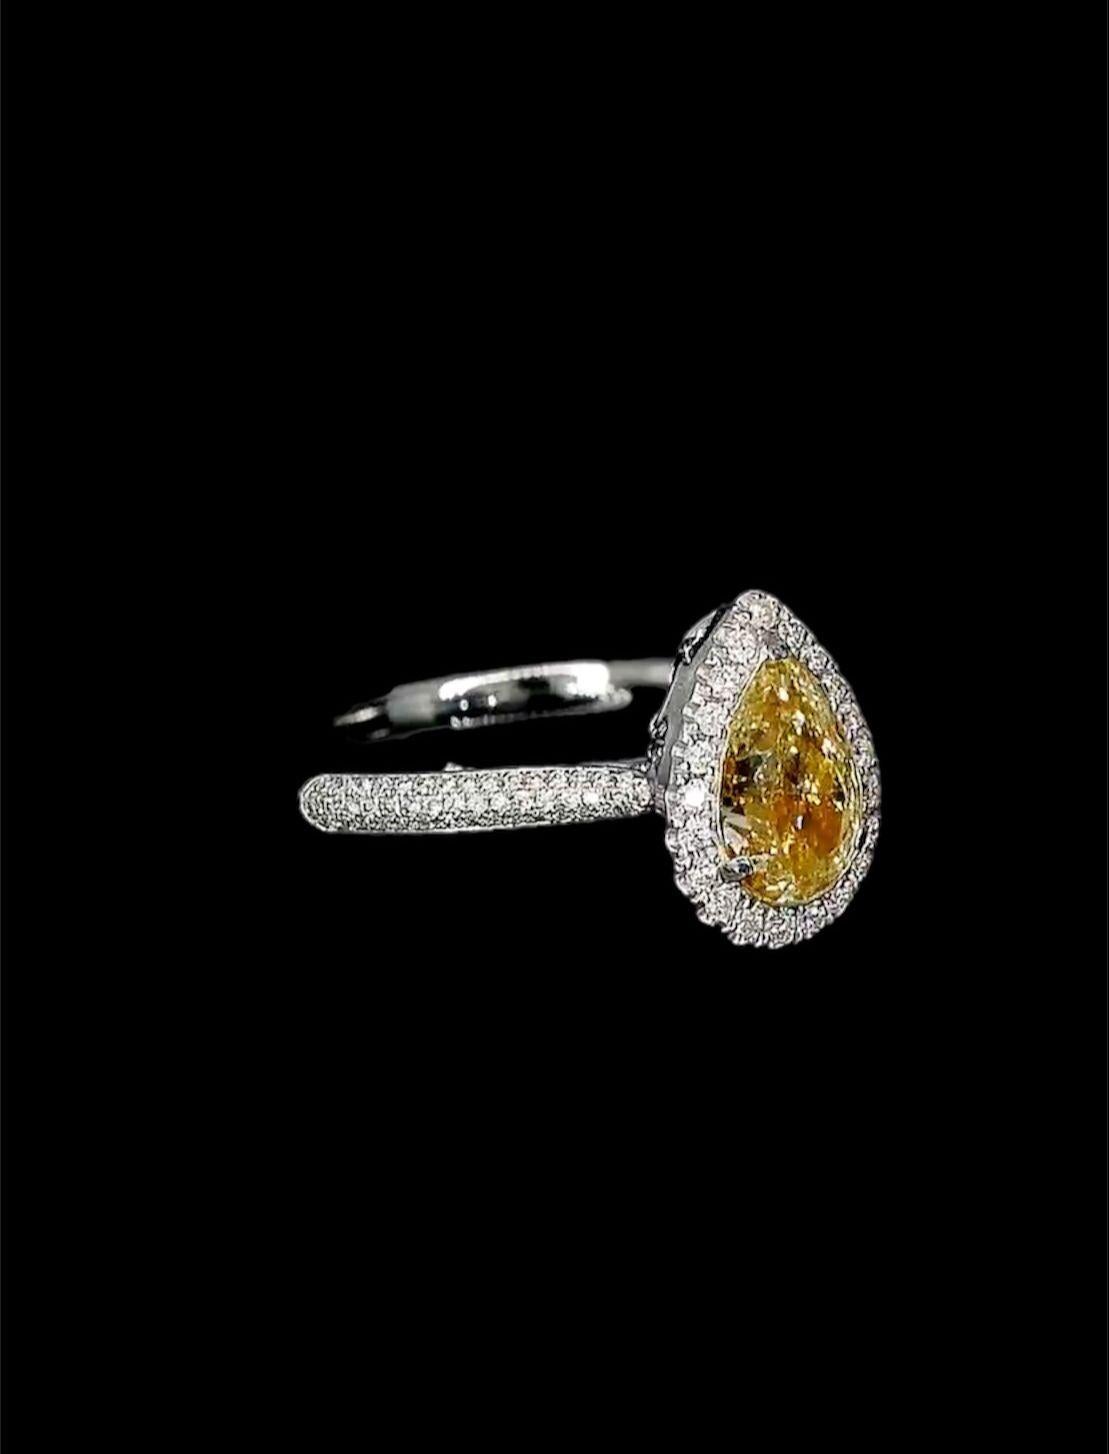 **100% NATURAL FANCY COLOUR DIAMOND JEWELRY**

✪ Jewelry Details ✪

♦ MAIN STONE DETAILS

➛ Stone Shape: Pear
➛ Stone Color: Fancy Yellow
➛ Stone Clarity: VS
➛ Stone Weight: 1.01 carats
➛ AGL certified

♦ SIDE STONE DETAILS

➛ Side white diamonds -